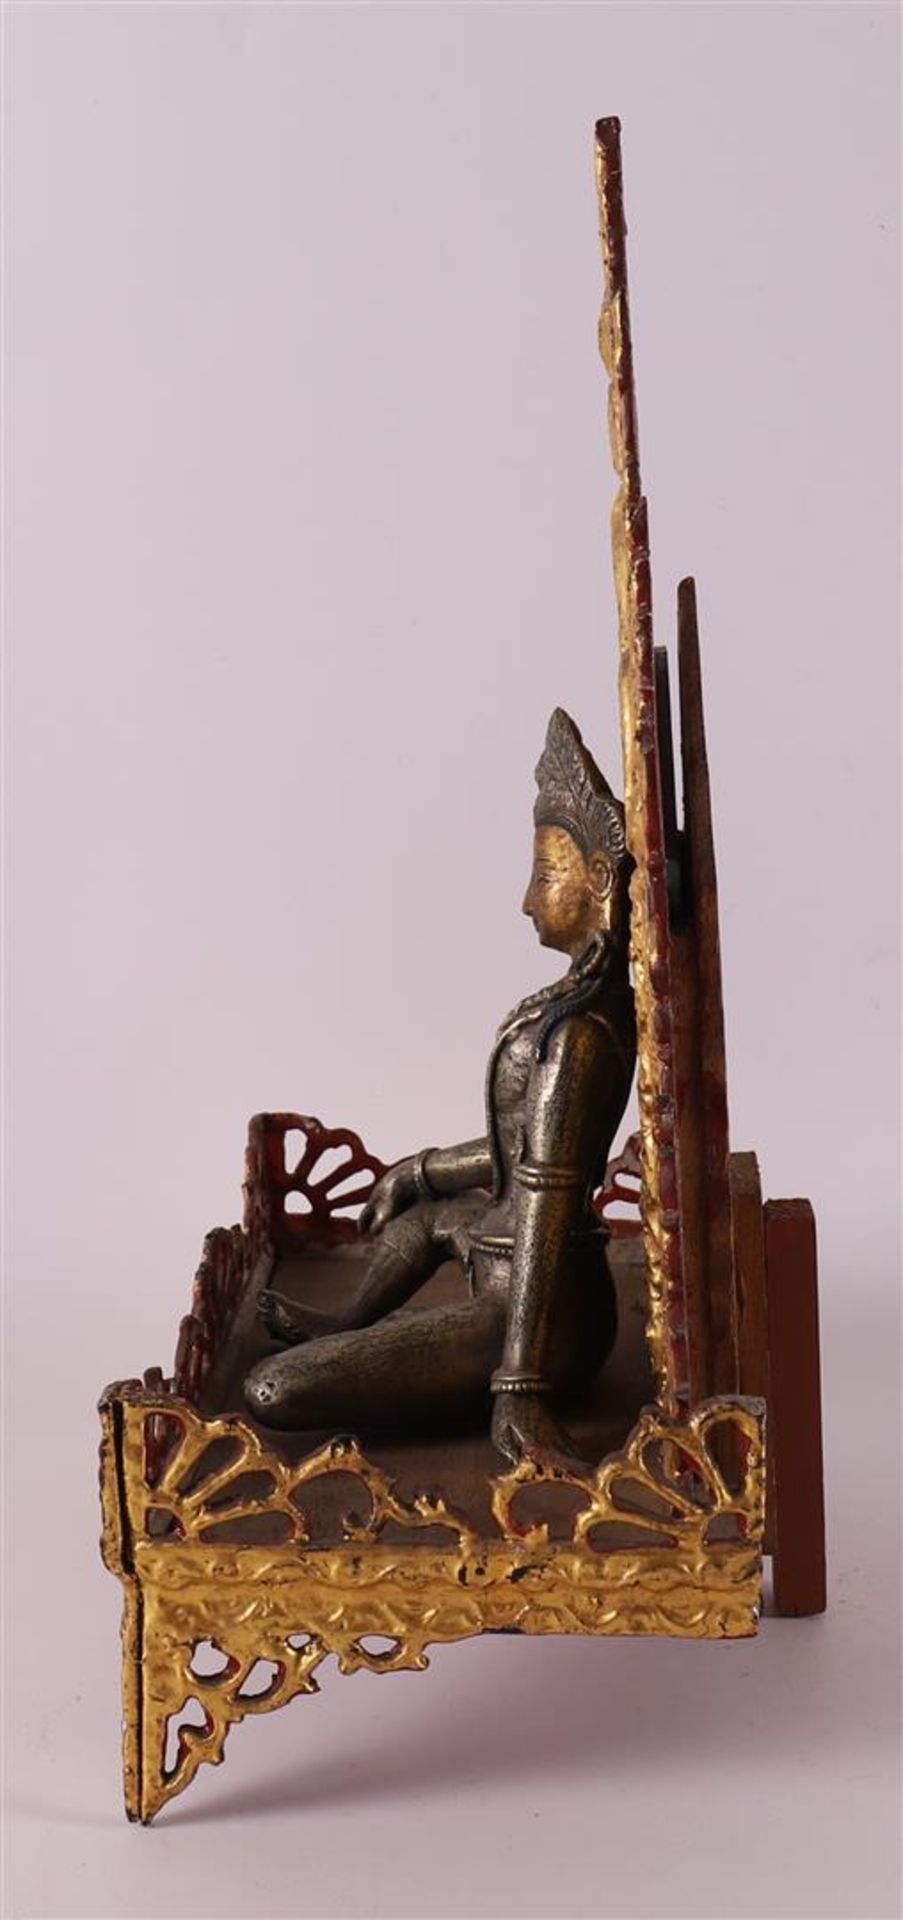 A silver-plated bronze Buddha on a loose gilded throne, India, 19th/20th century - Image 3 of 5